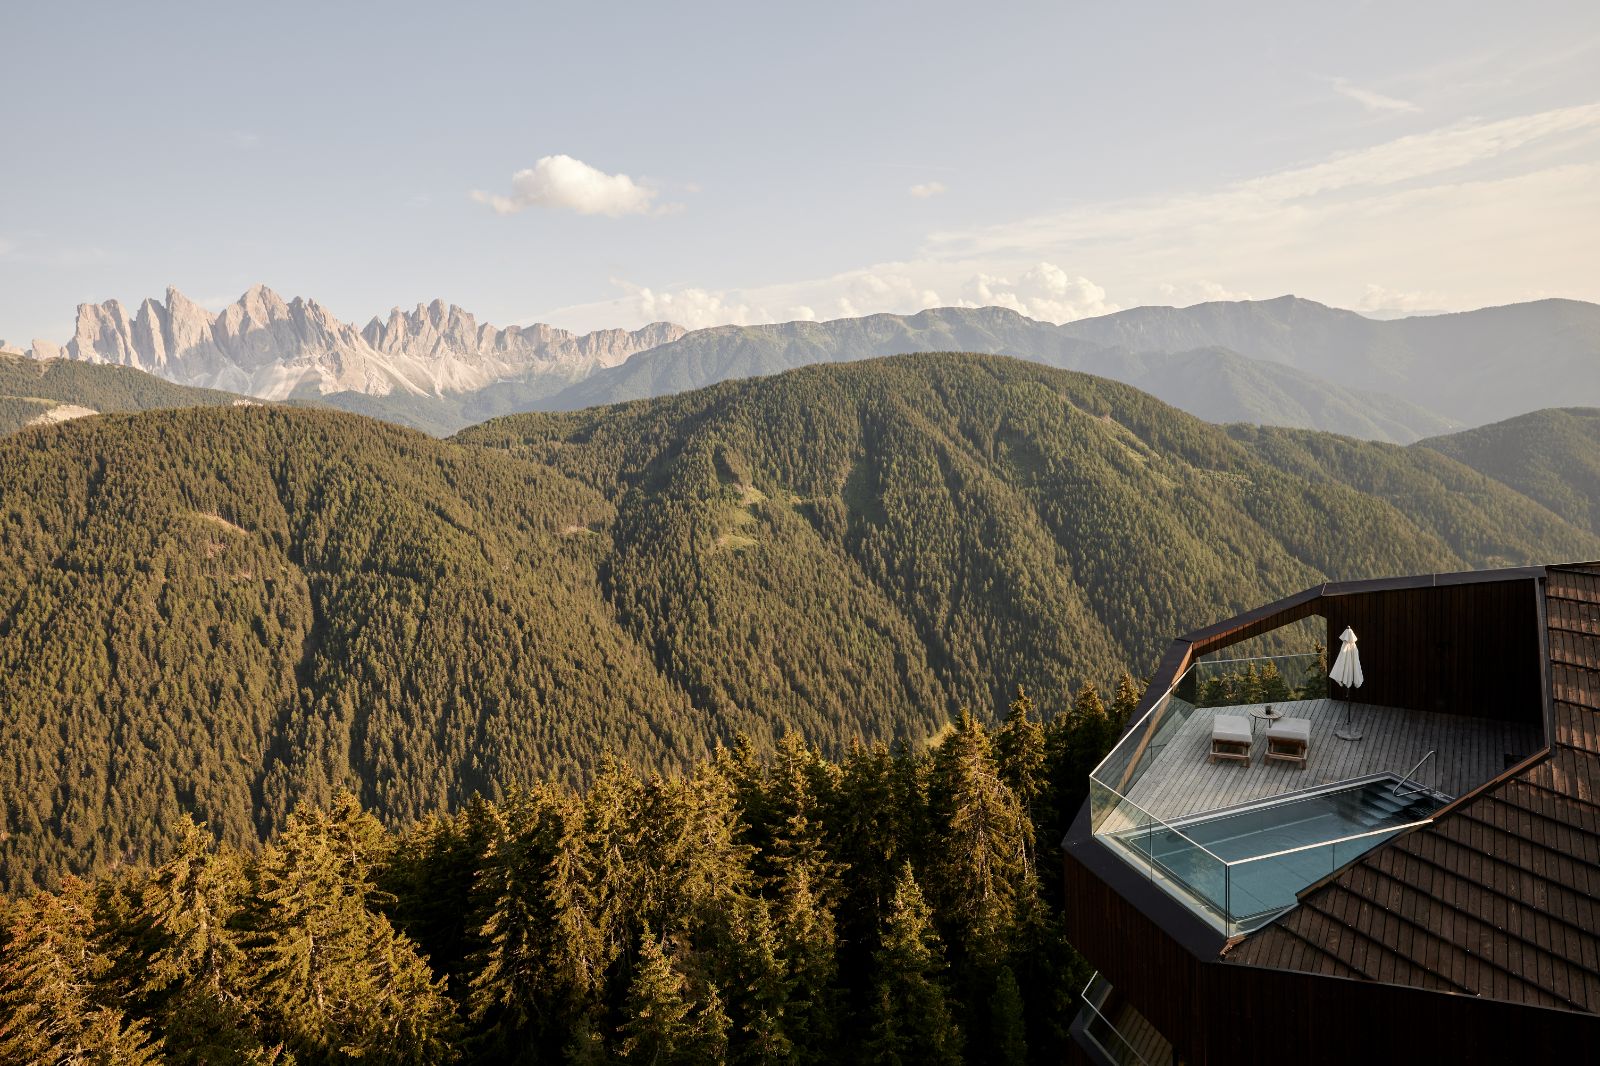 Roof terrace at the Forestis hotel in the Dolomites